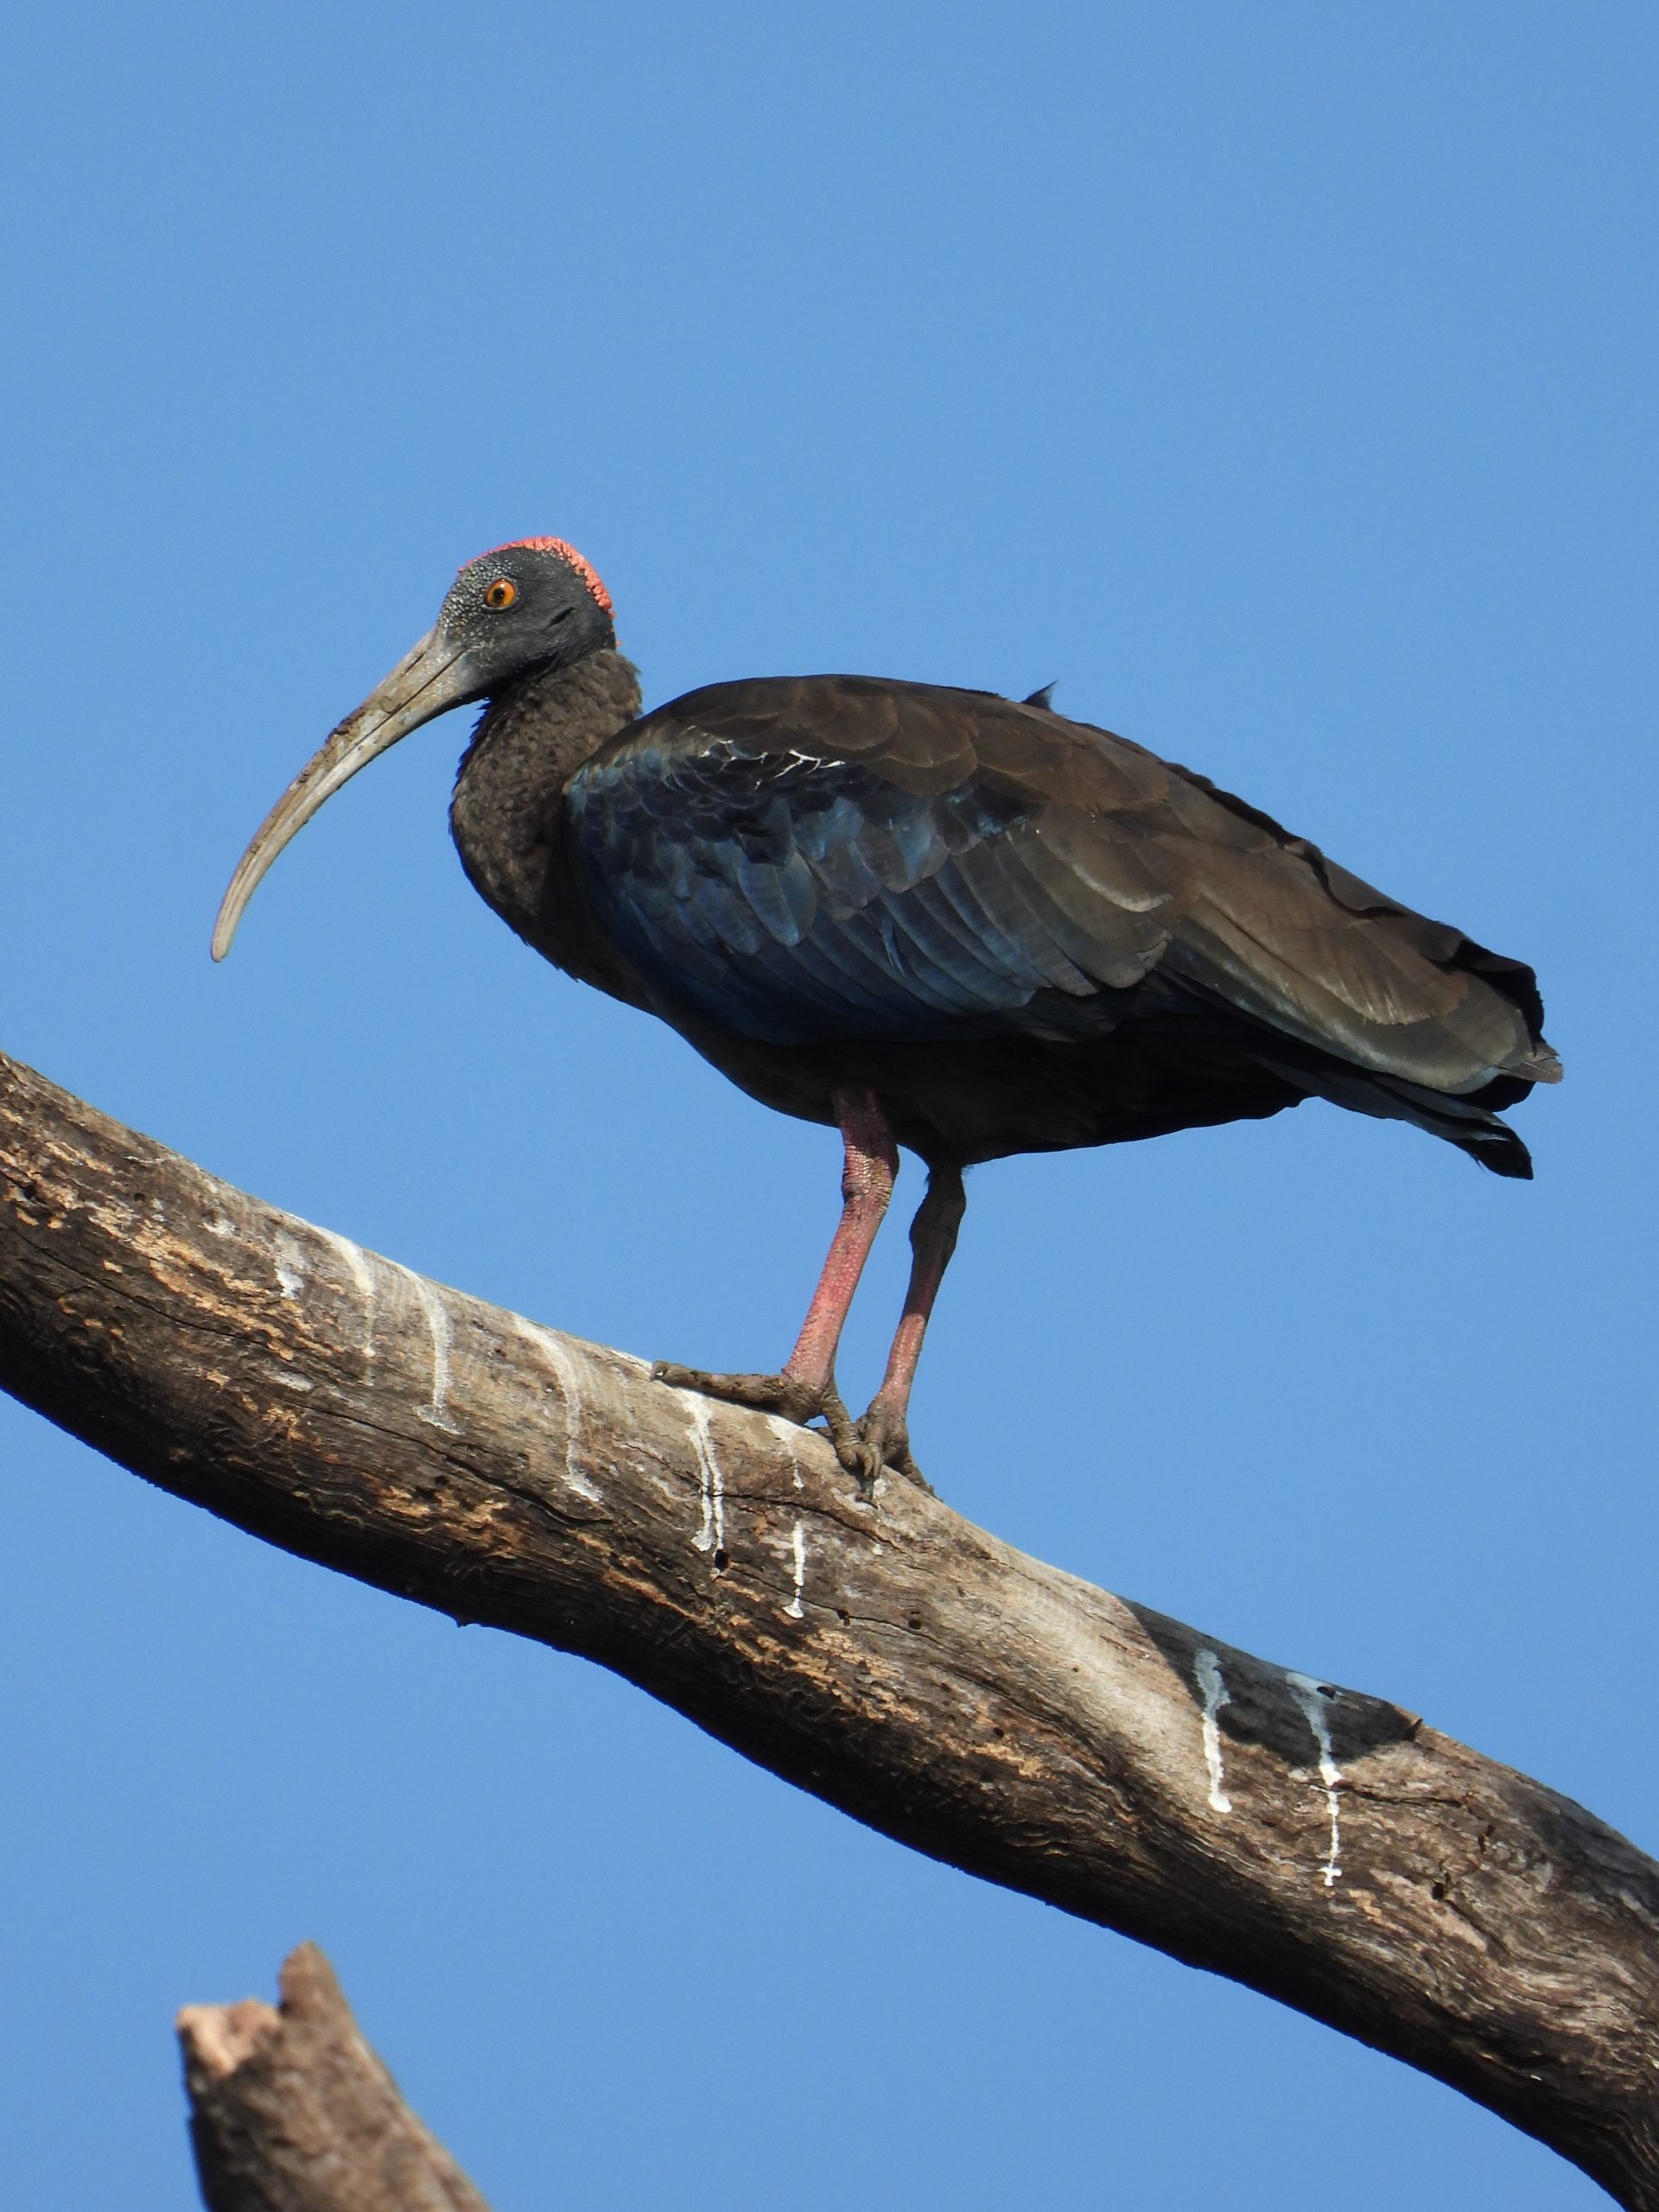 Ibis on tree branch